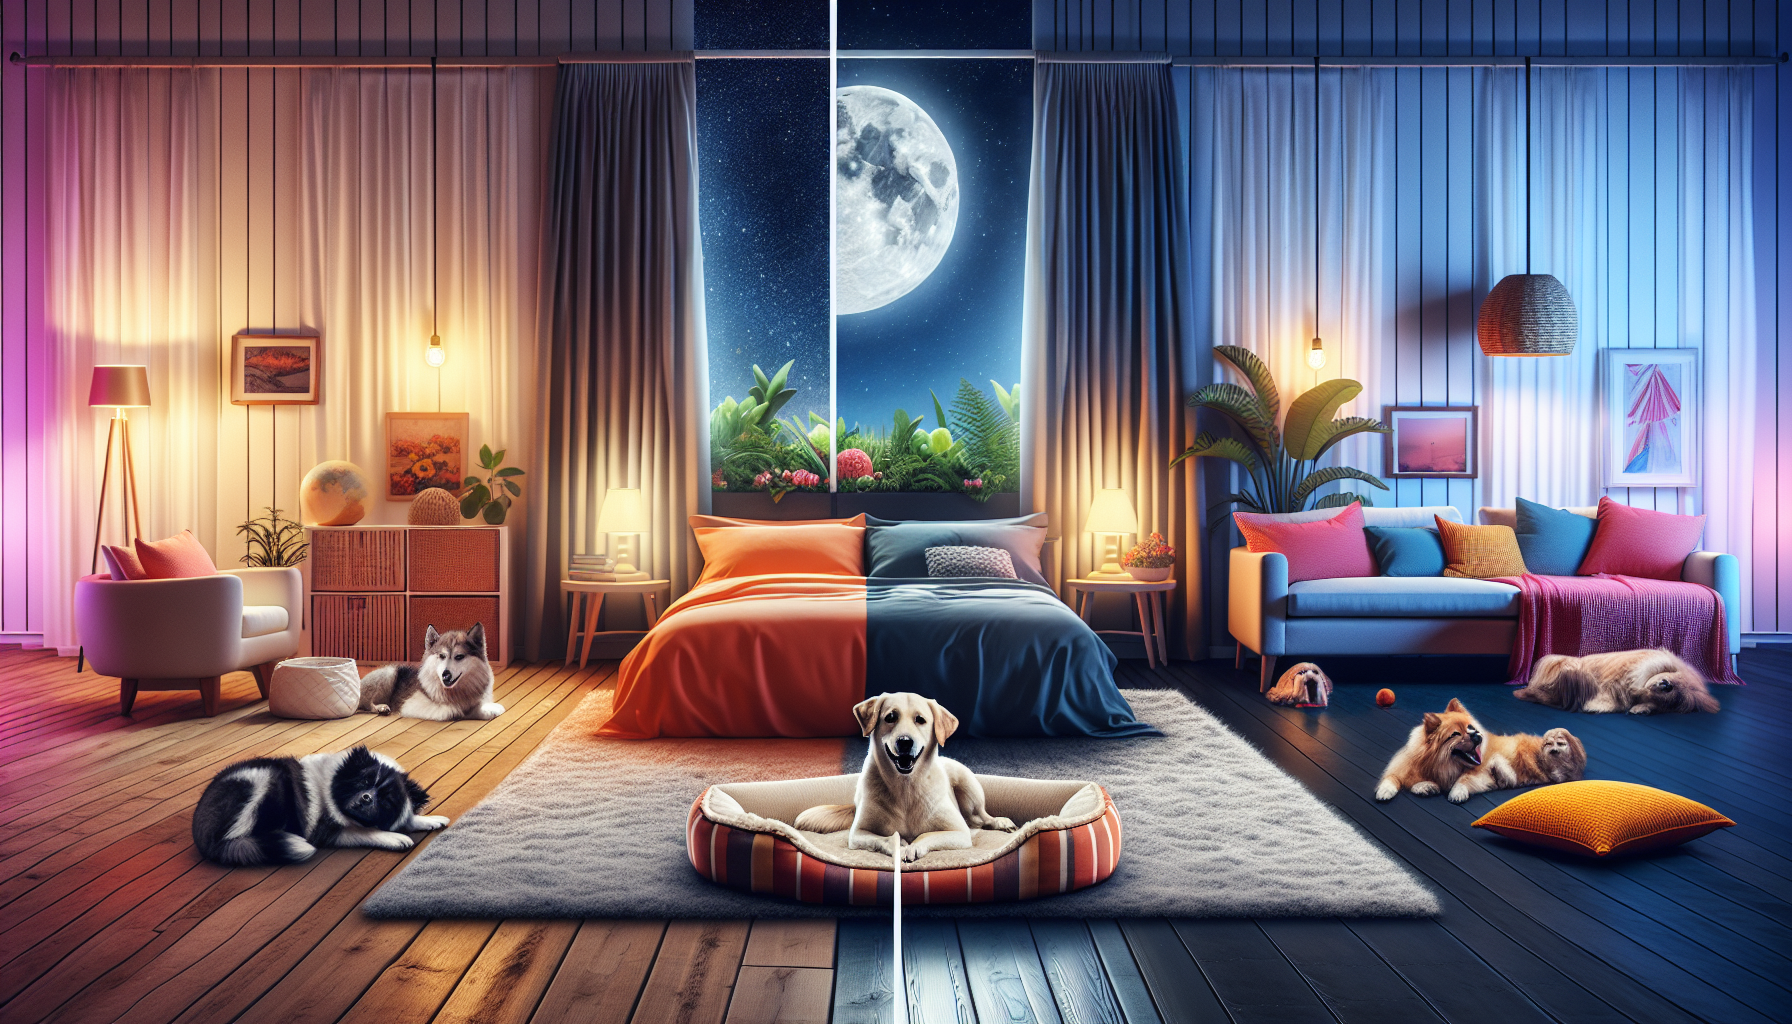 Should A Dog Bed Be In The Bedroom Or Living Room?